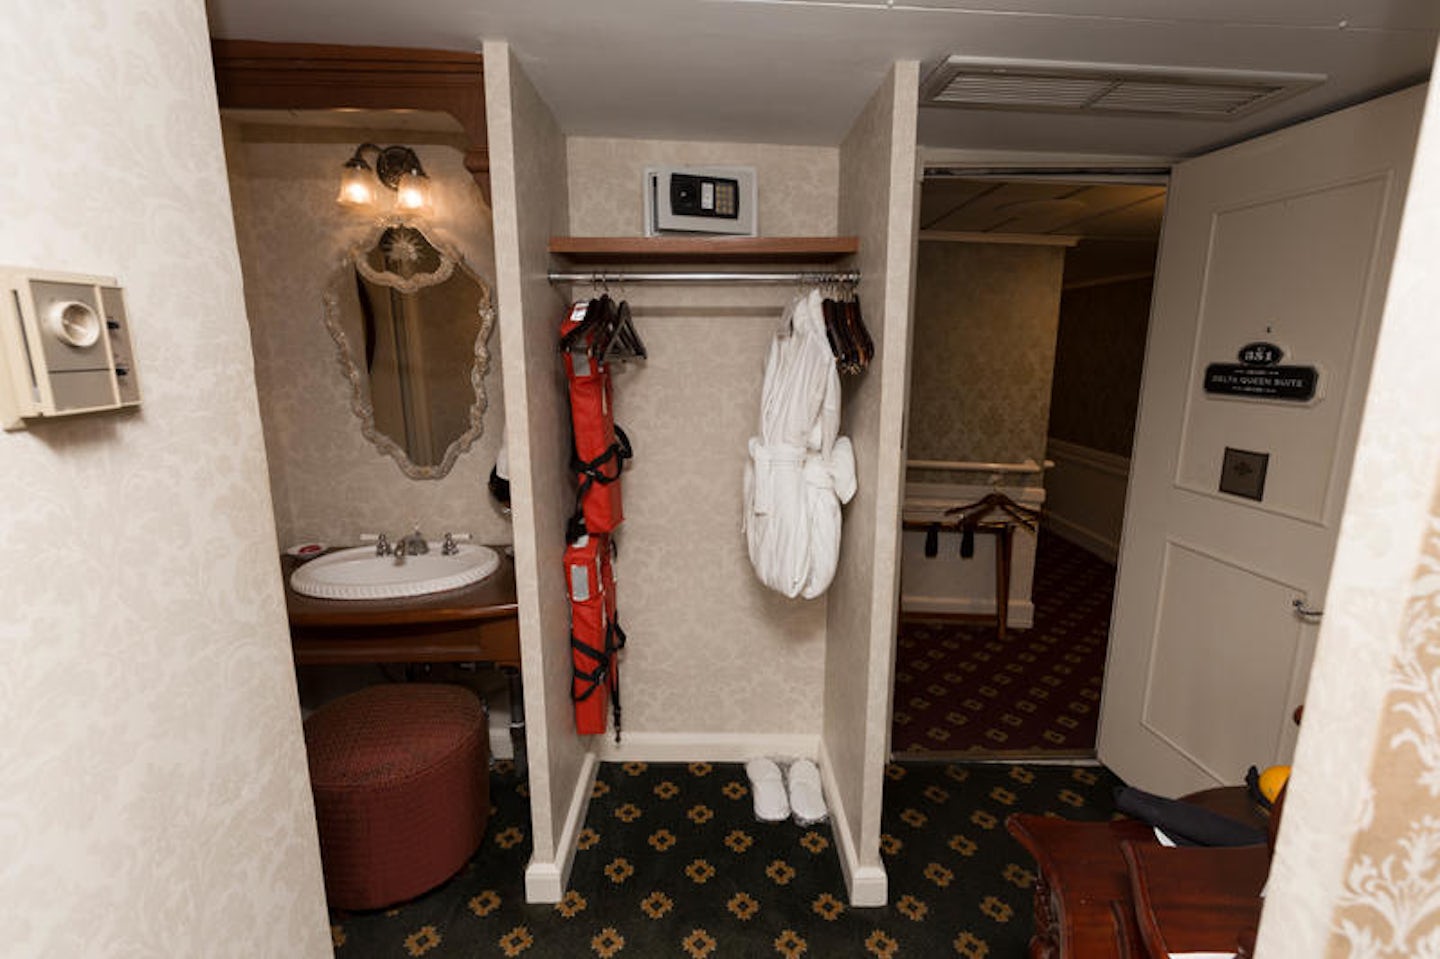 The Stern Luxury Suite with Open Balcony on American Queen